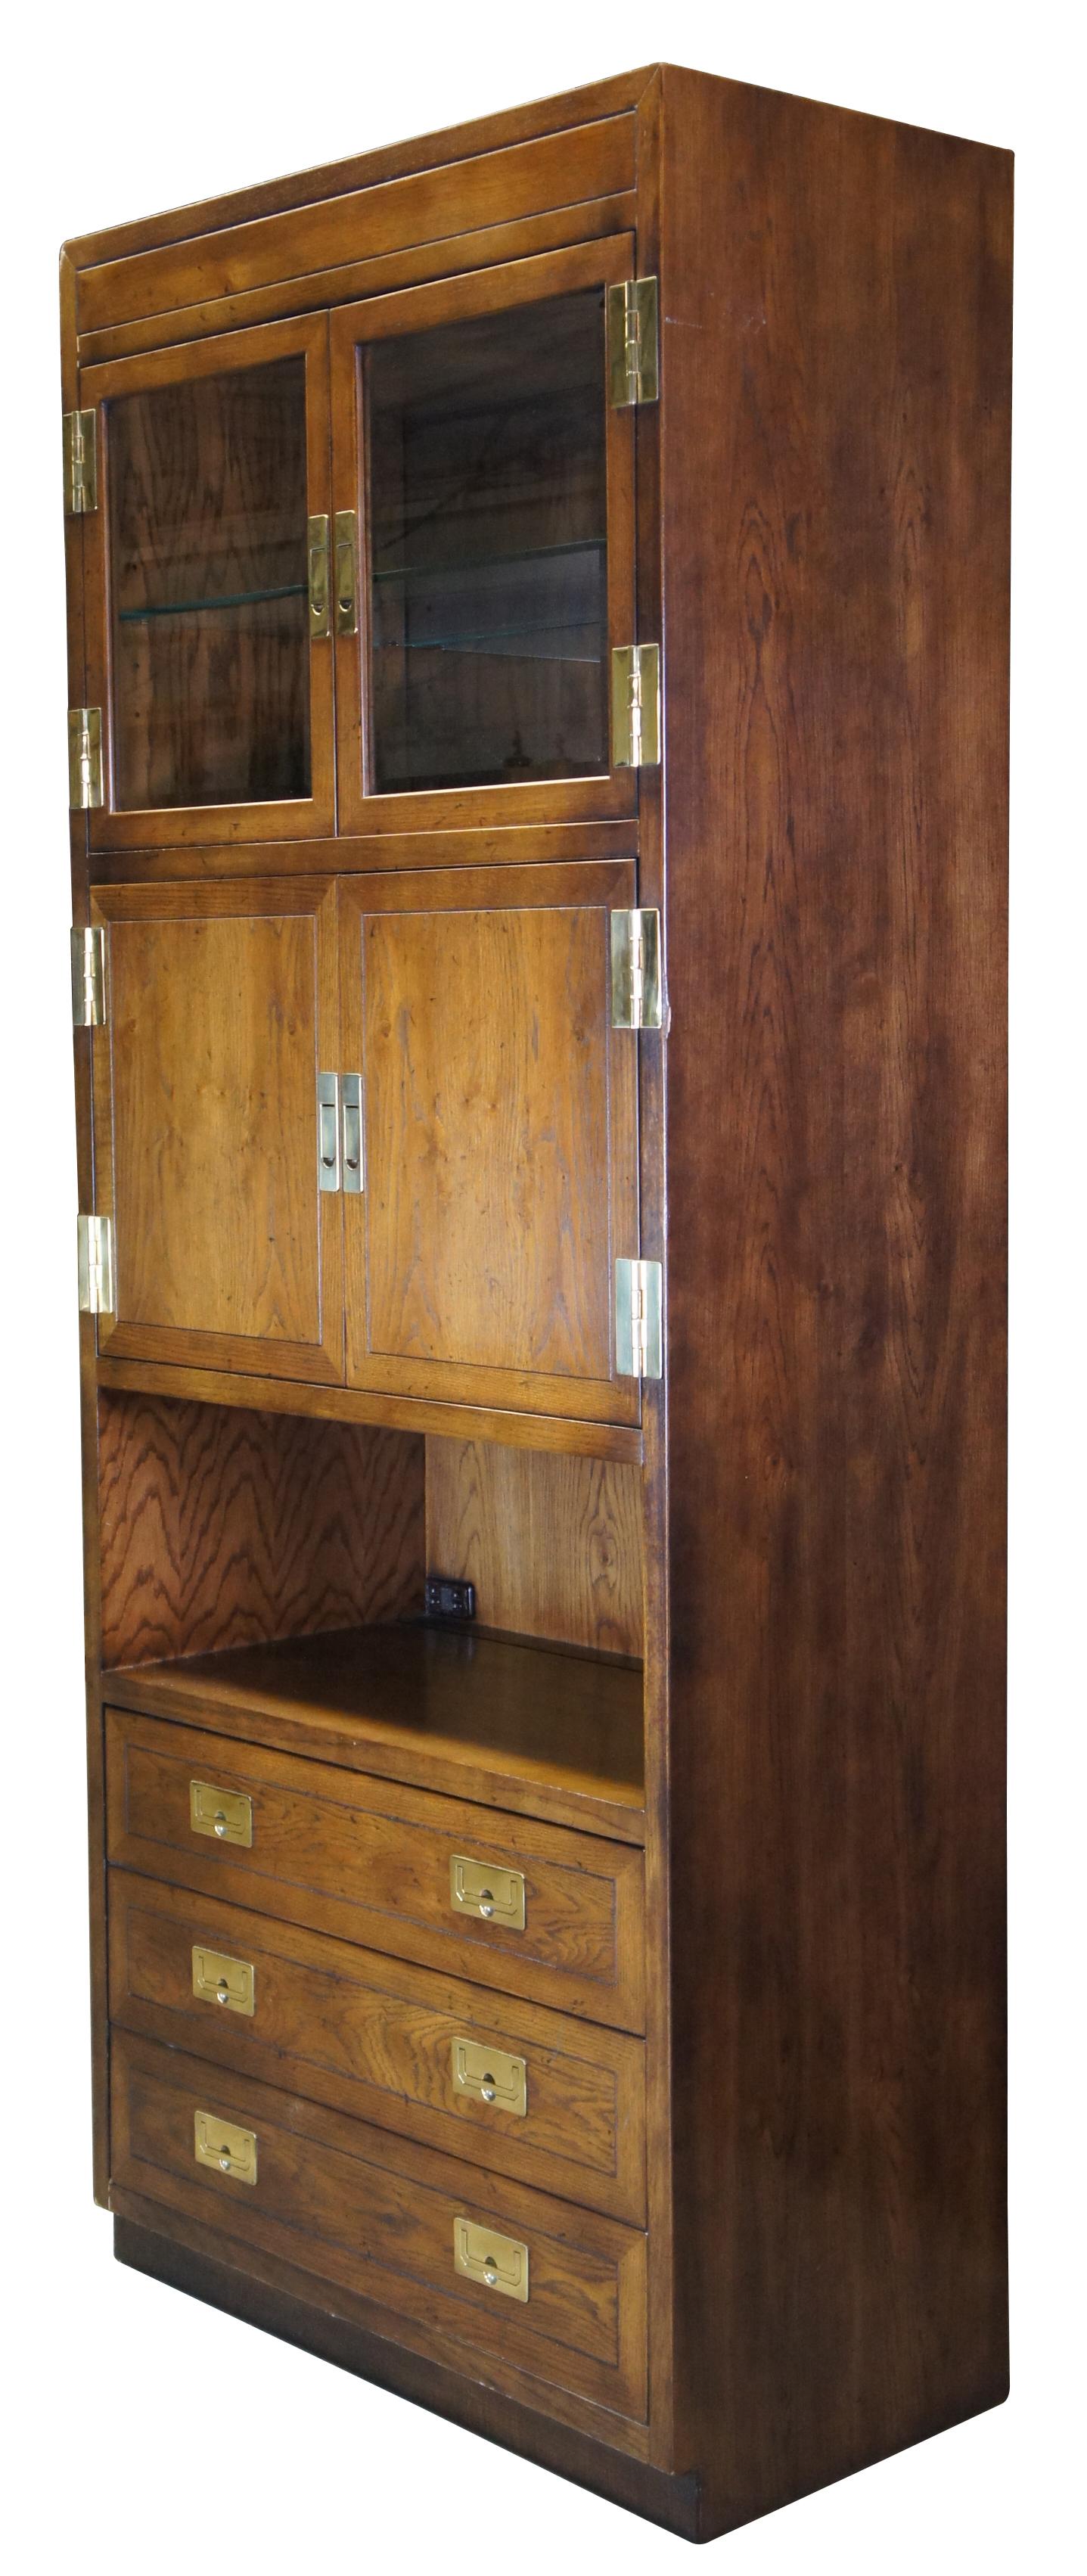 Vintage Henredon campaign style cabinet. Made of oak featuring upper curio cabinet, central bar entertainment area with pull out tray and bookcase, and three lower storage drawers. All accented with modern brass hardware. Illuminated. Circa 1980s.
 